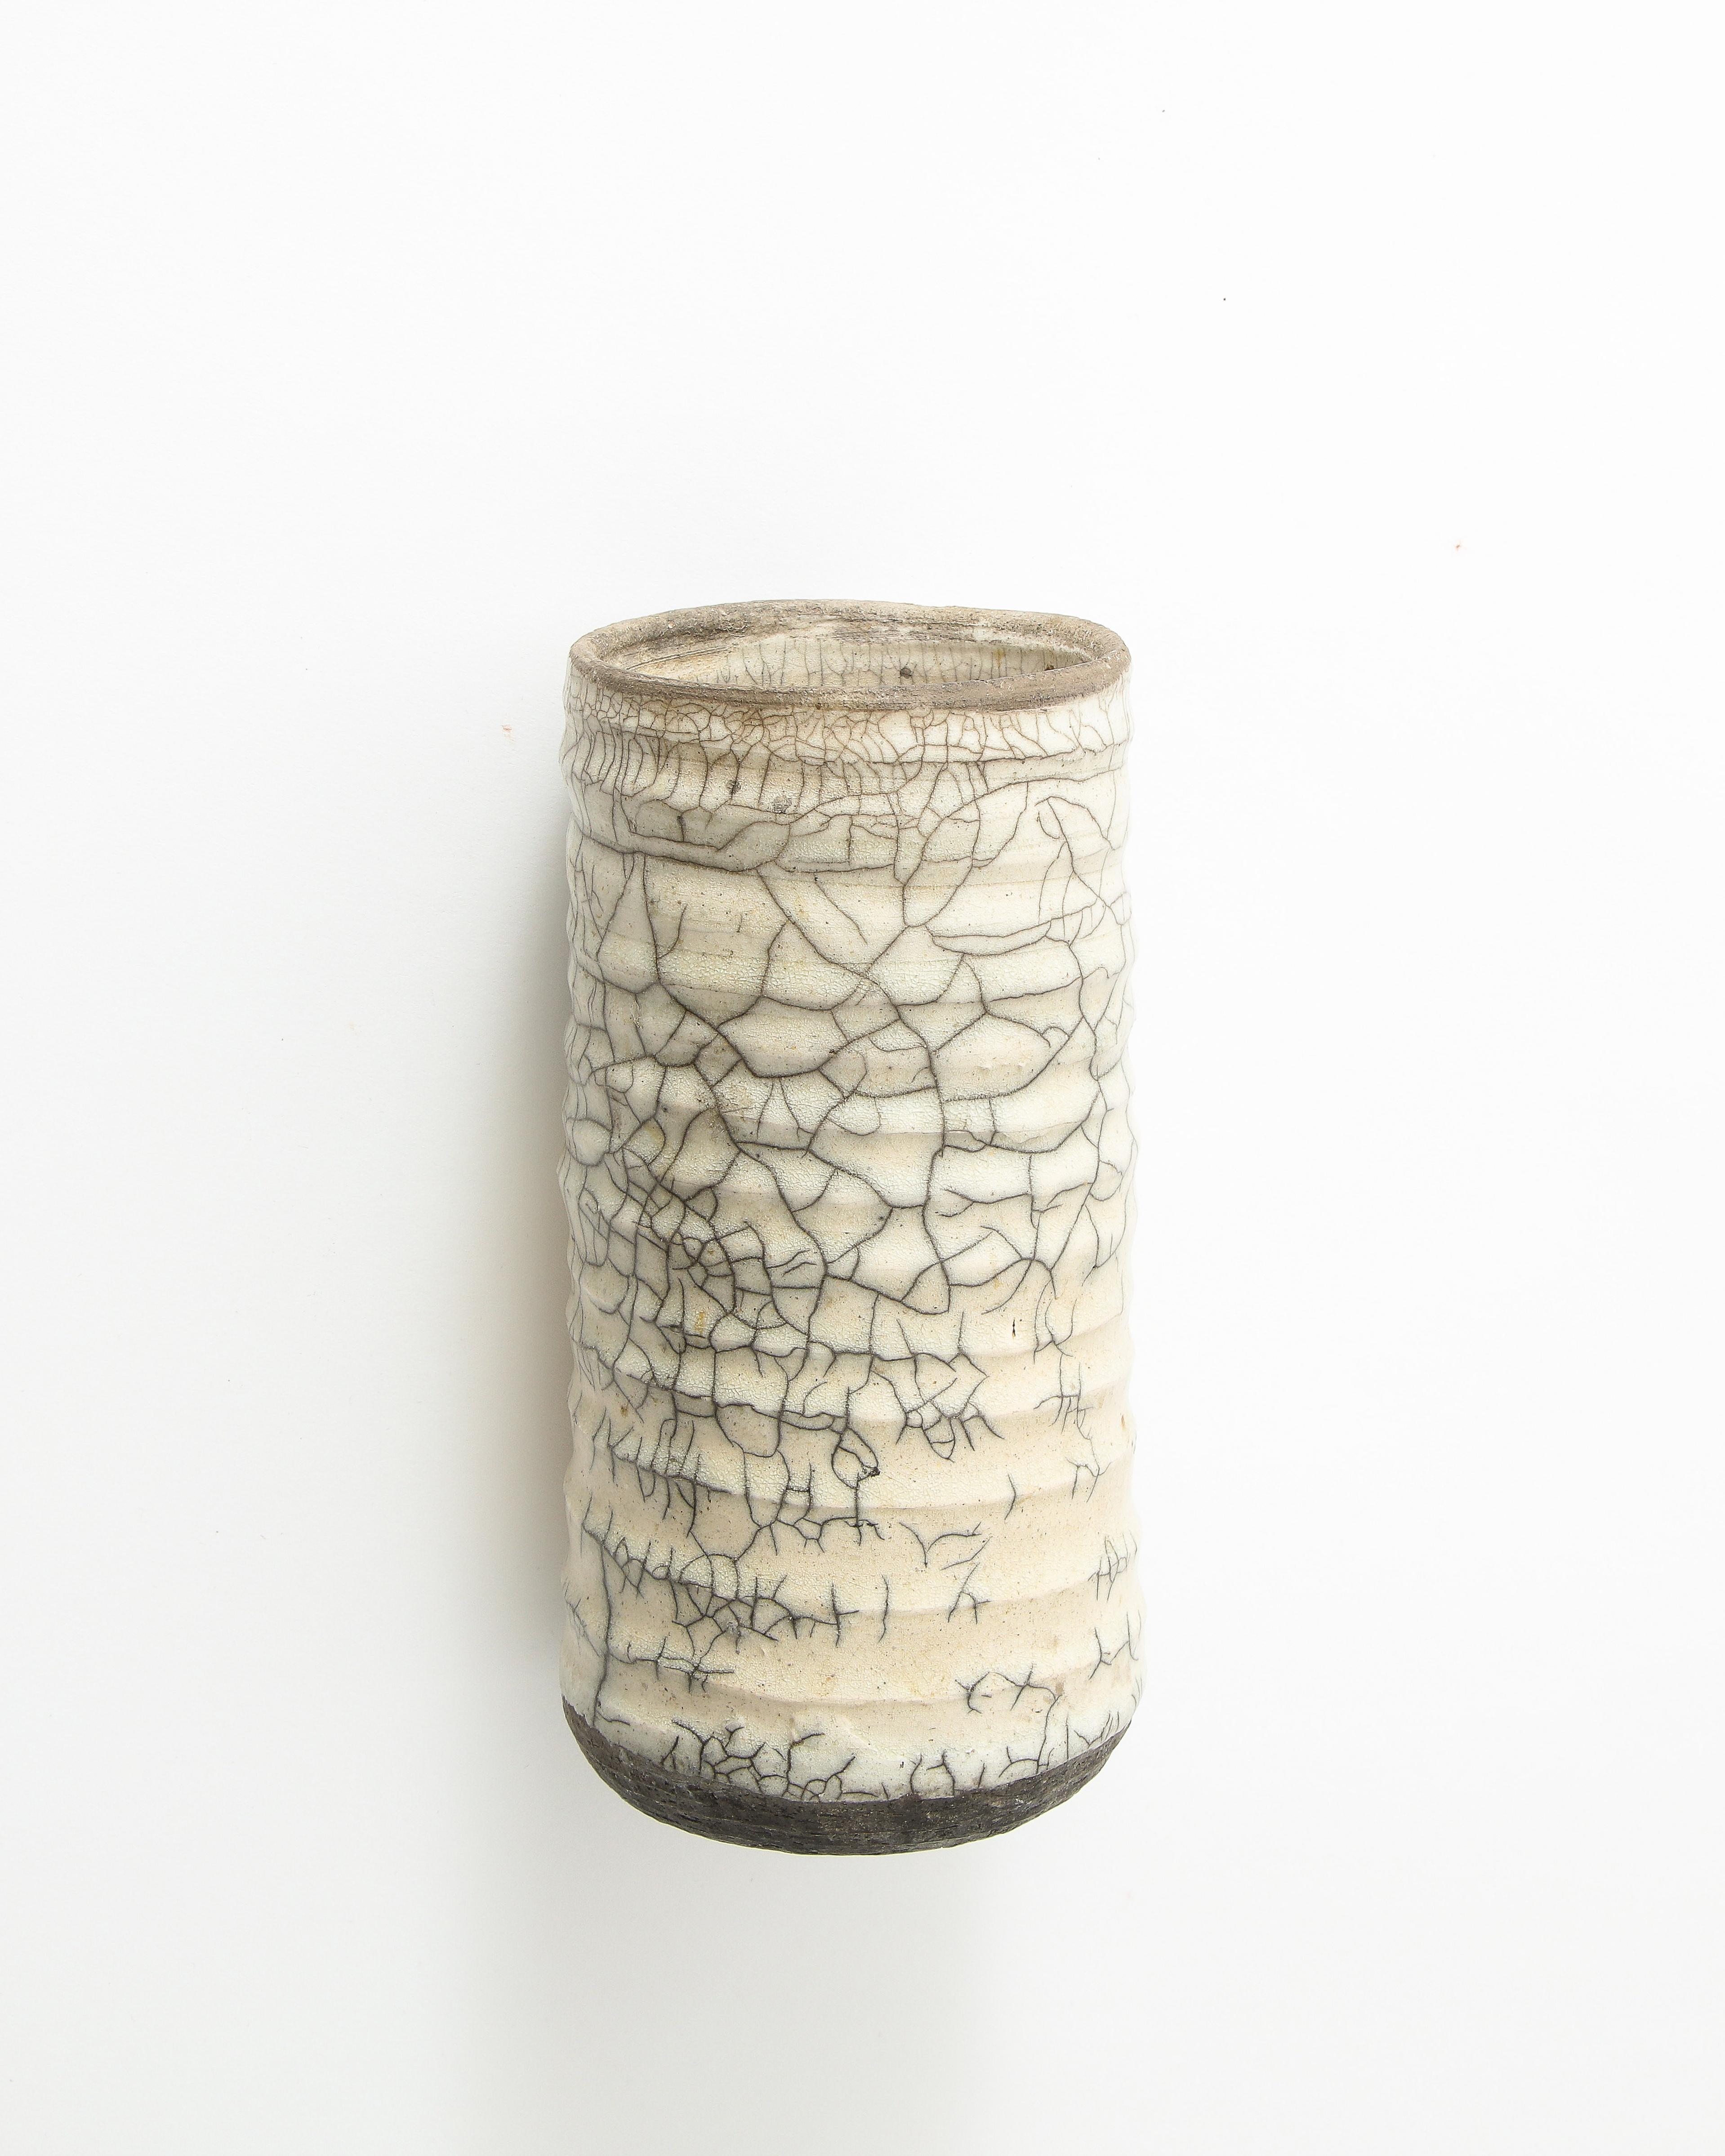 Off-White Ceramic Vase with Intricate Crackling 10